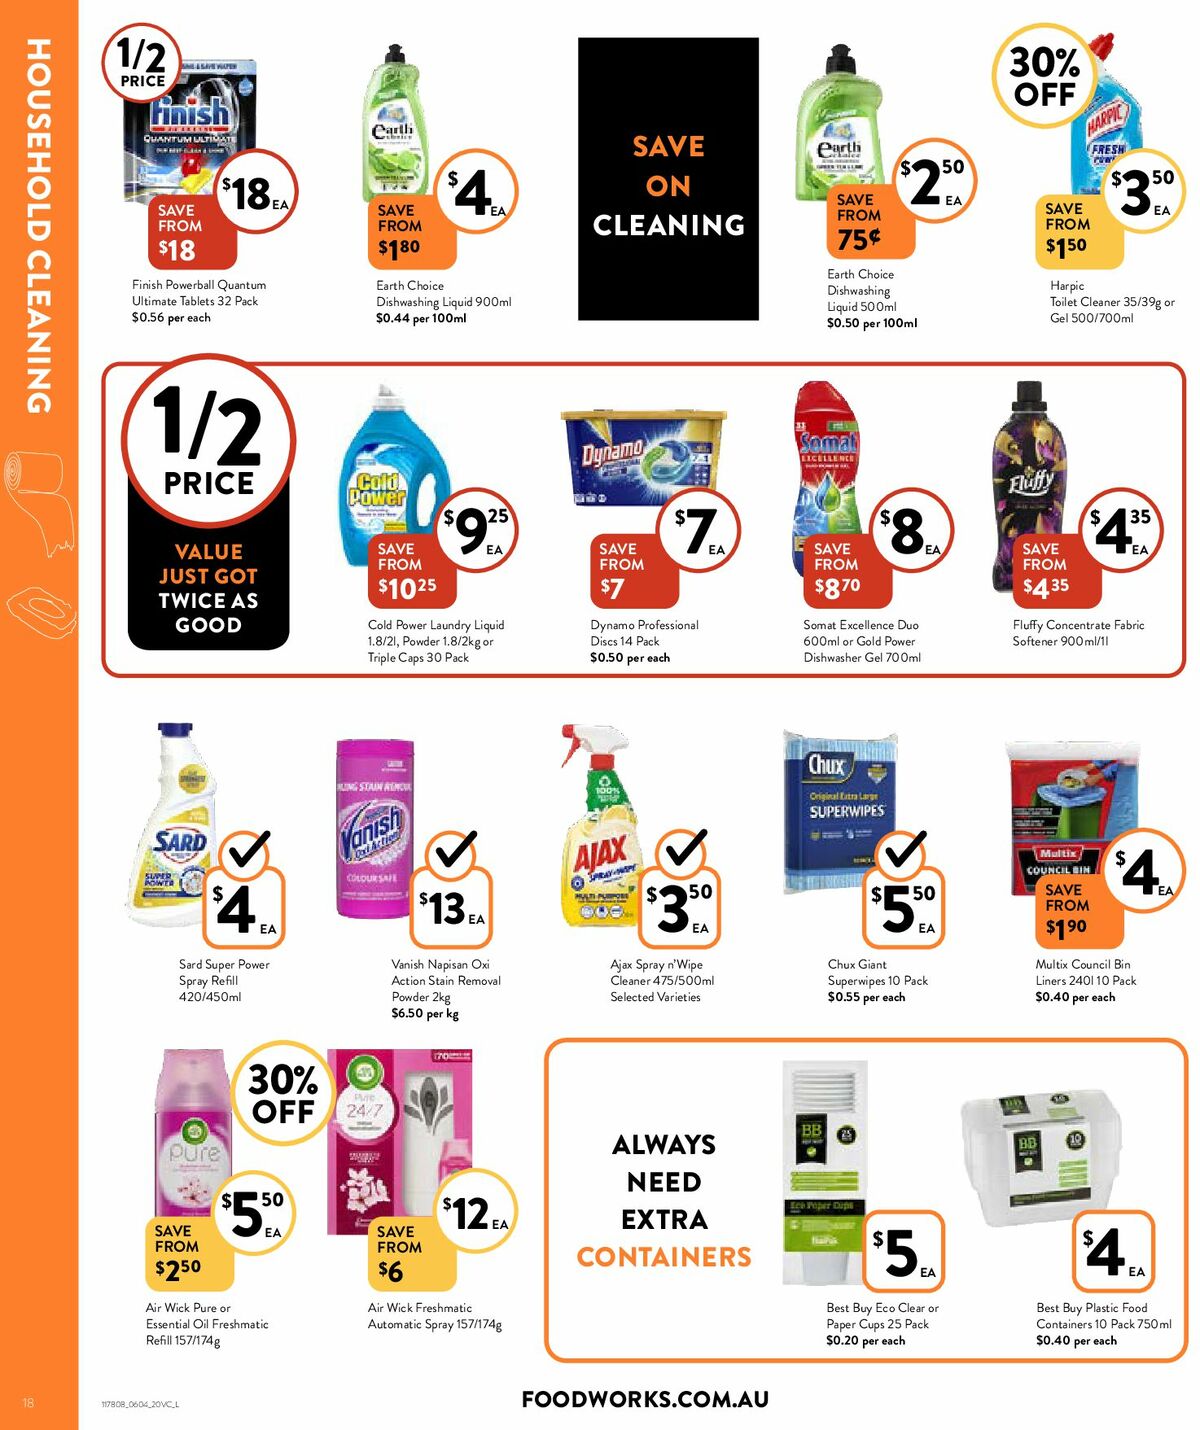 FoodWorks Supermarket Catalogues from 6 April